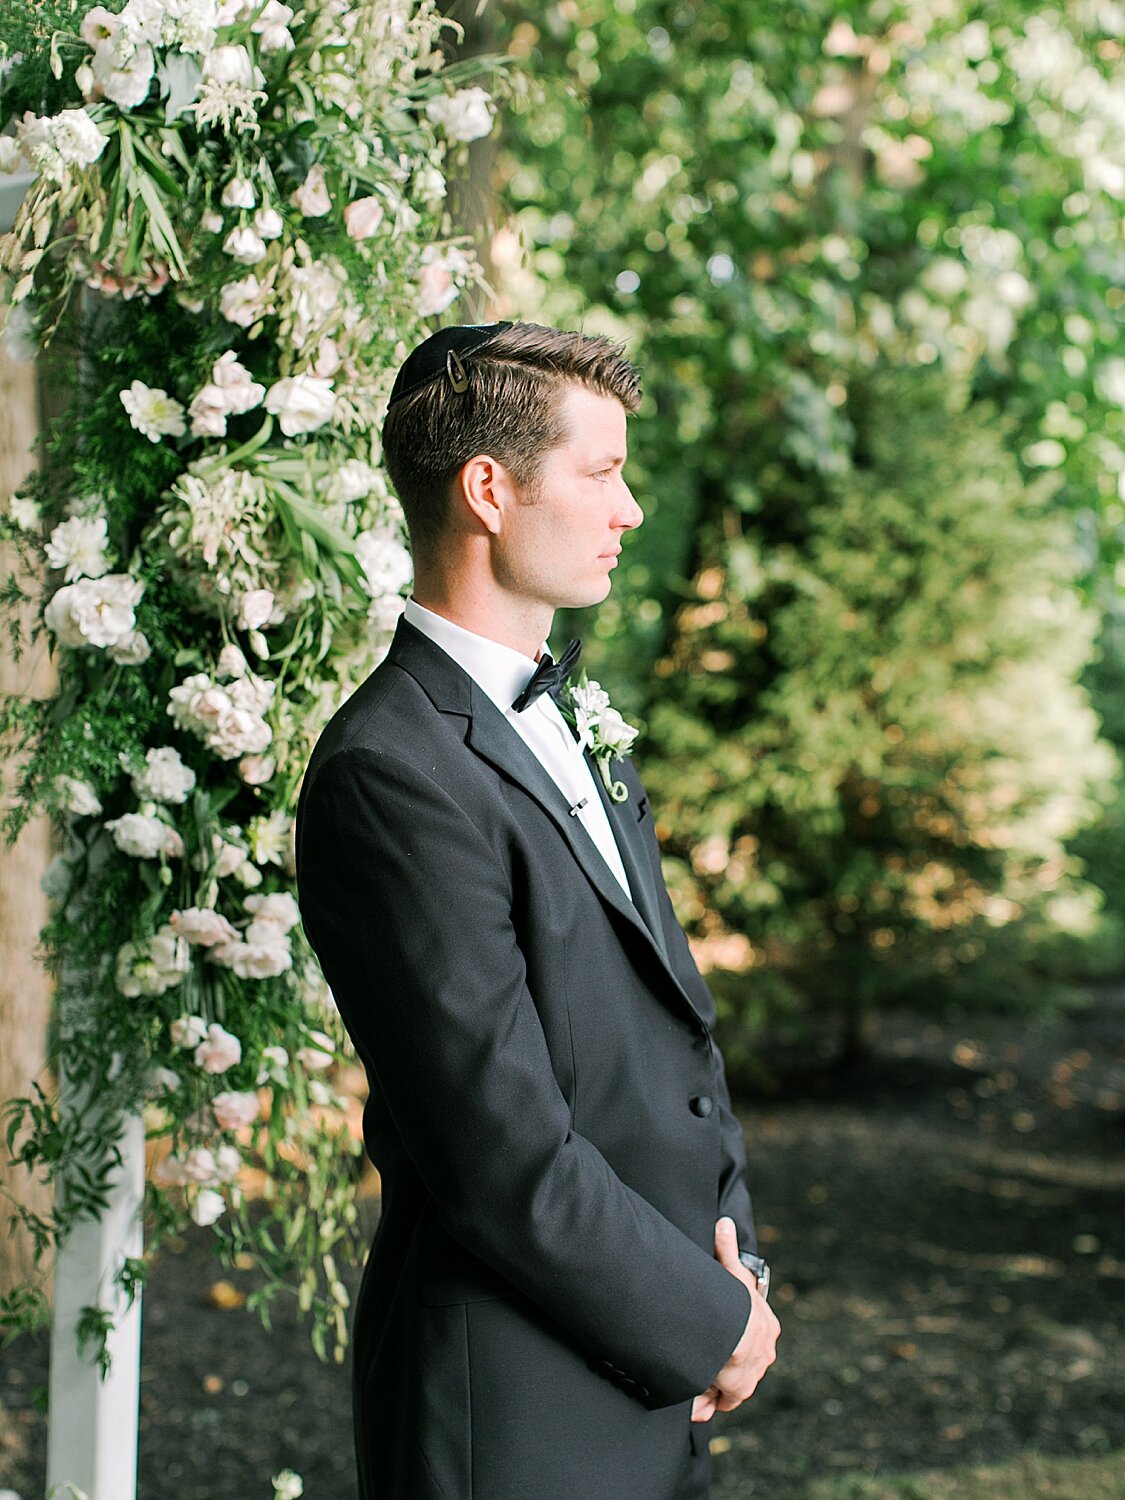 groom watches bride walk down aisle during private estate wedding | Stylish Private Home Wedding Inspiration | Asher Gardner Photography